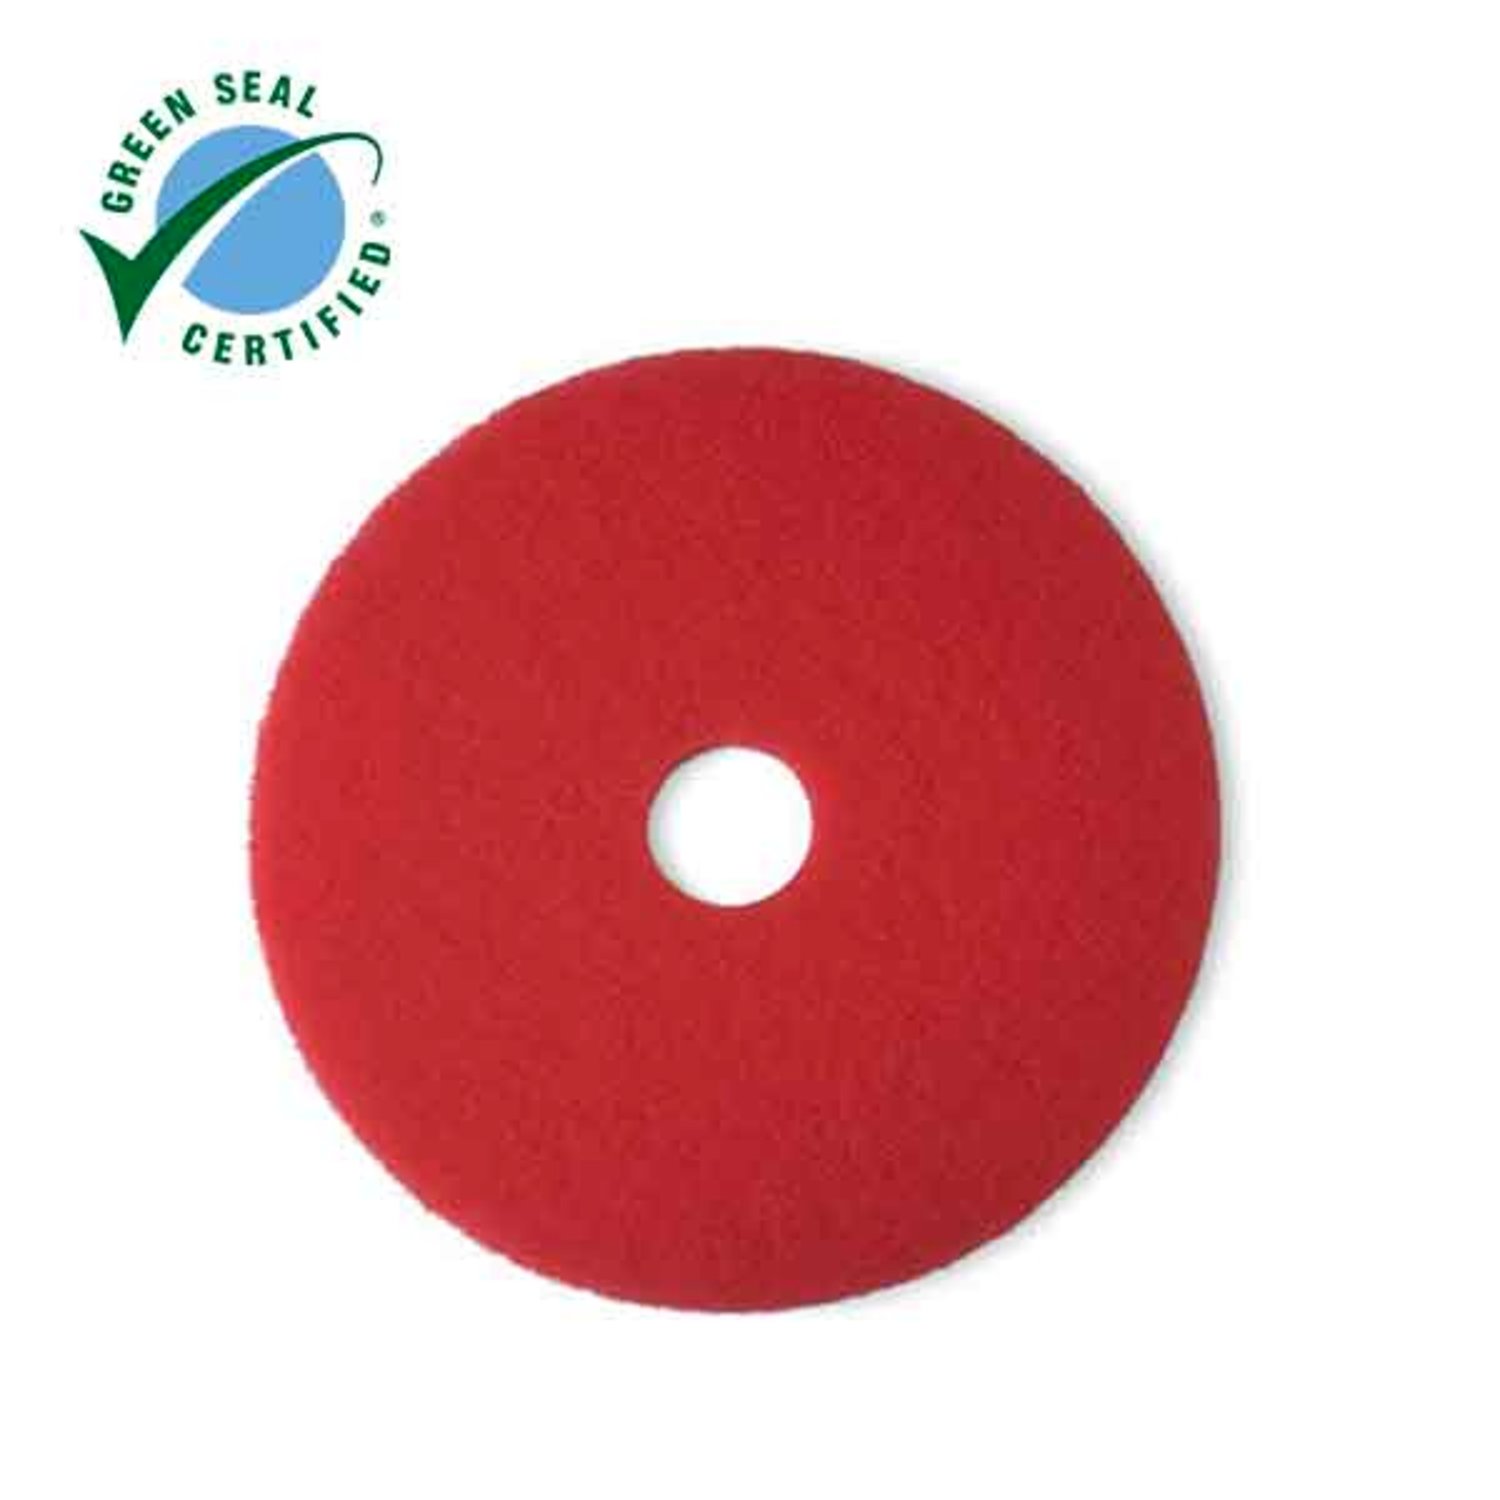 7000000663 - 3M Red Buffer Pad 5100, Red, 510 mm x 82 mm, 20 in, 5 ea/Case